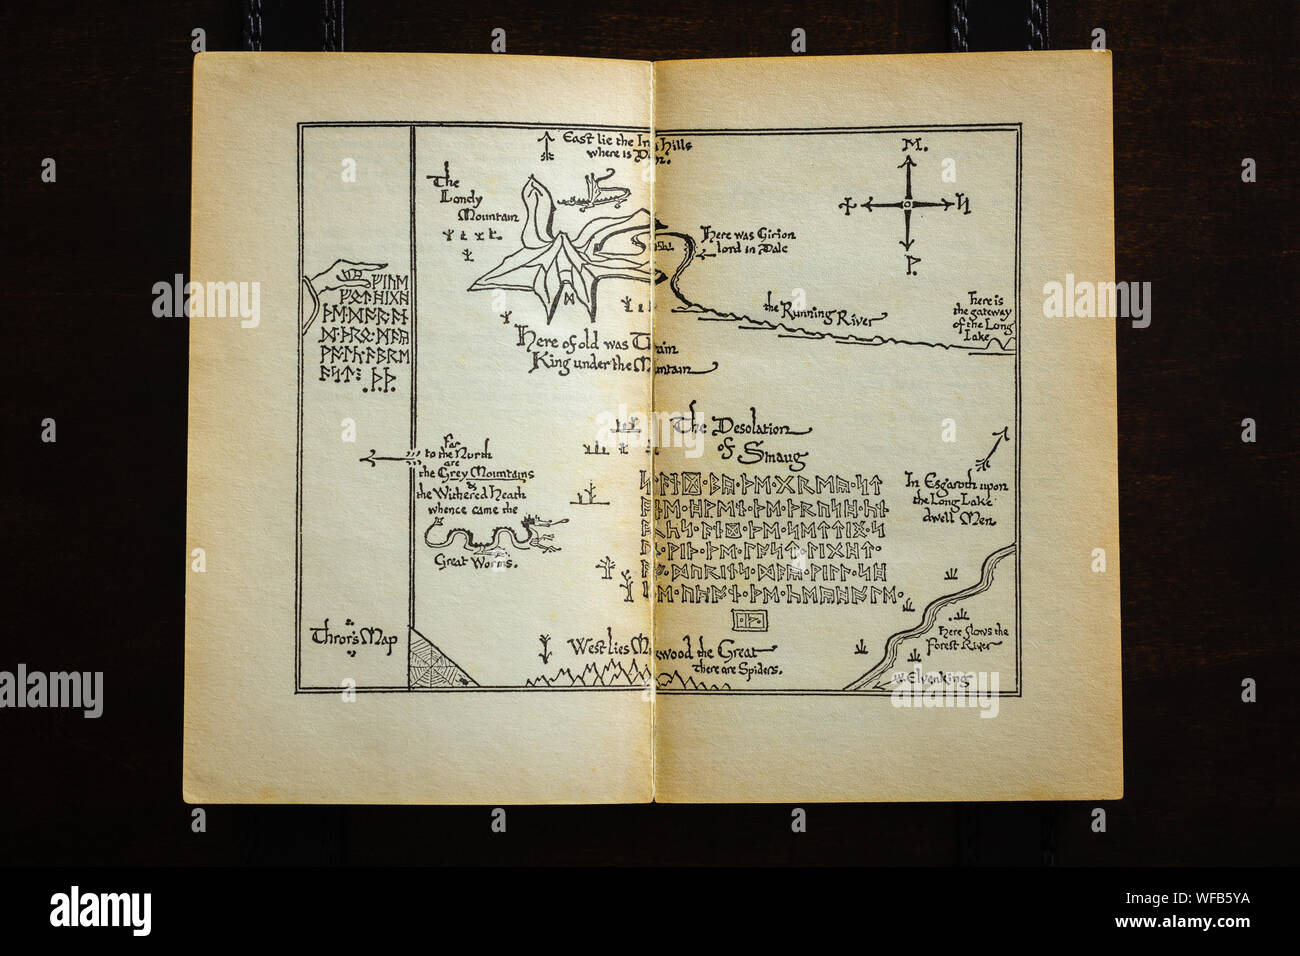 A vintage paperback showing Thror's Map in The Hobbit detailing the lonely mountain and the desolation of Smaug. Written by J.R.R. Tolkien Stock Photo